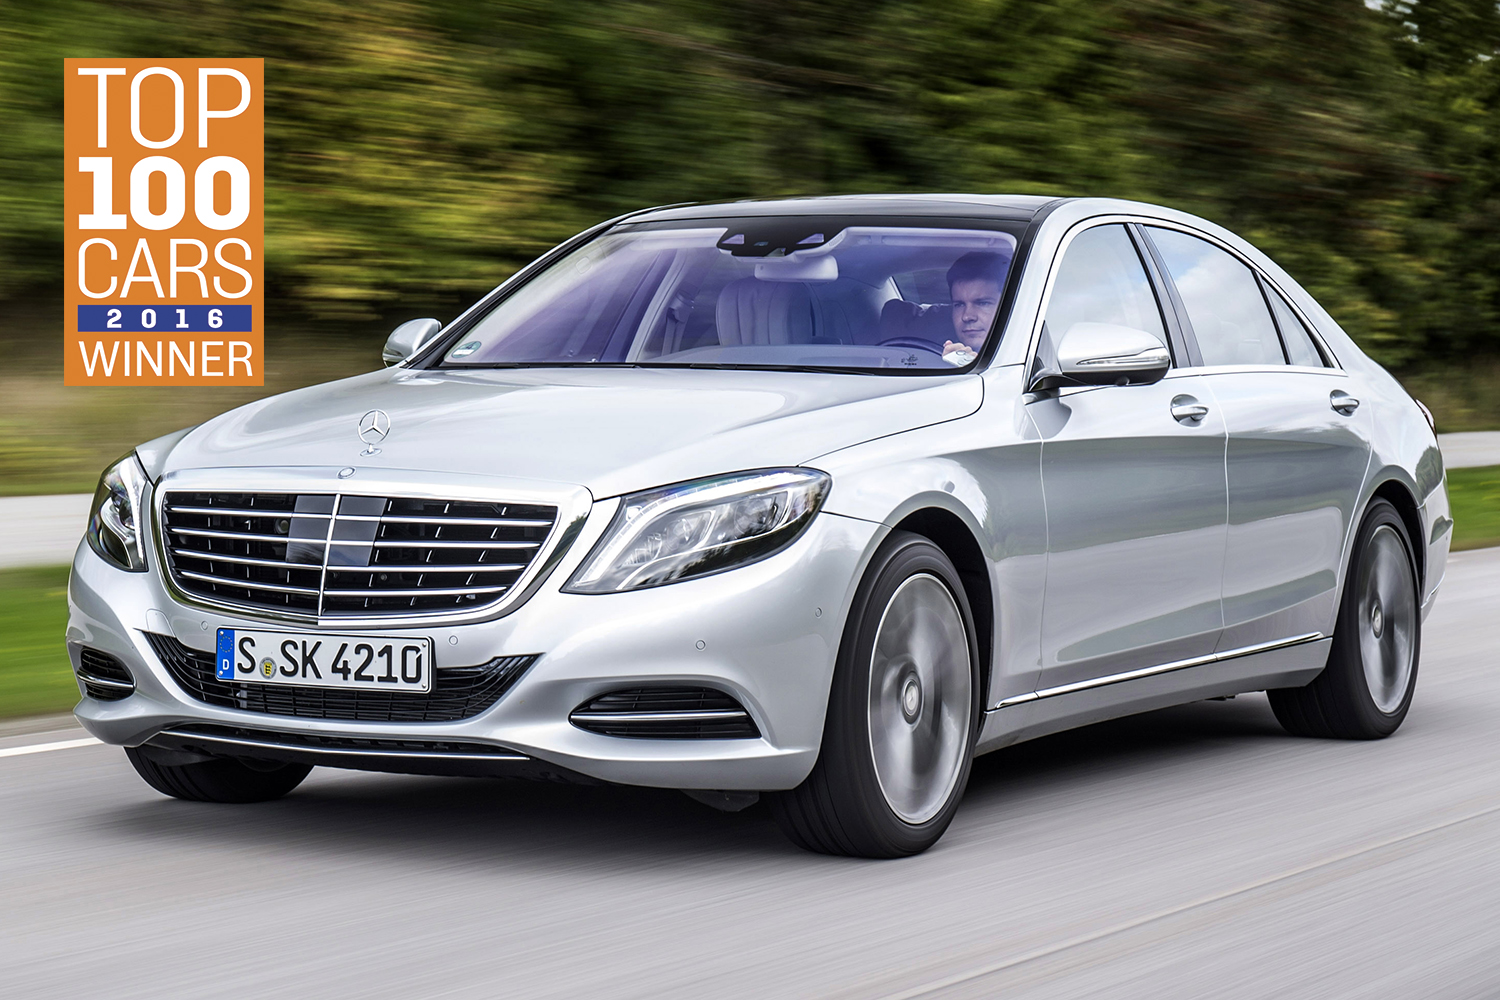 Mercedes S-class: The Sunday Times Top 100 Cars 2016 Best Luxury car